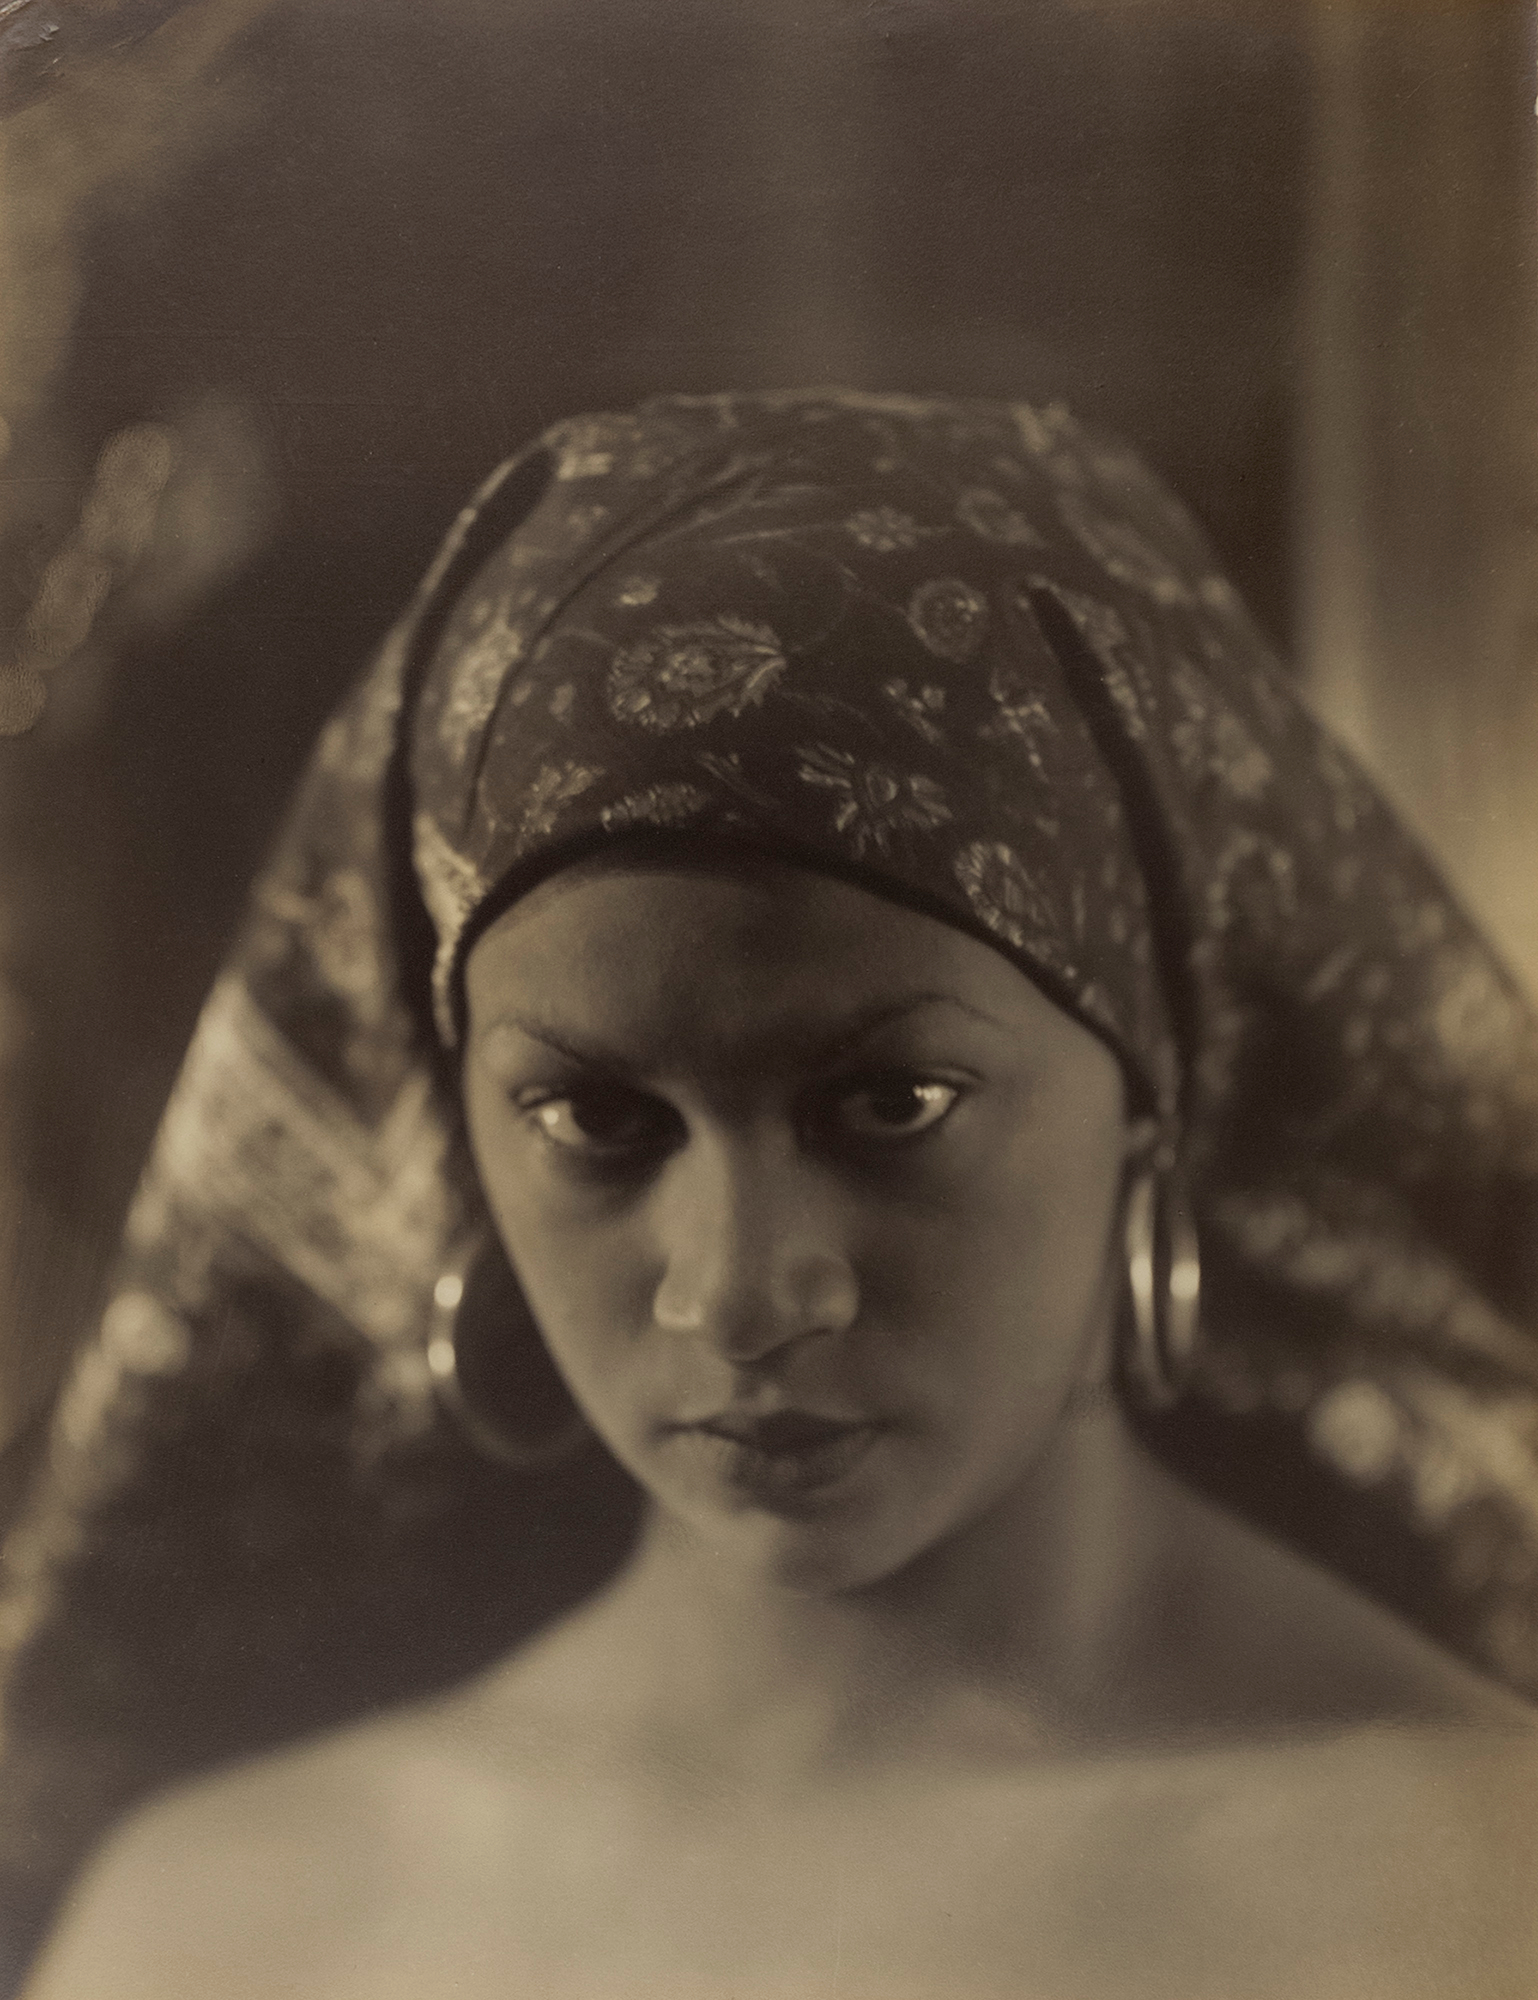     Violet Keene Perinchief, African Appeal, around 1935. Gelatin silver print, Overall (sheet): 64.45 x 50.80 cm. Courtesy Stephen Bulger Gallery © The Estate of Violet Keene Perinchief/ Stephen Bulger Gallery.

